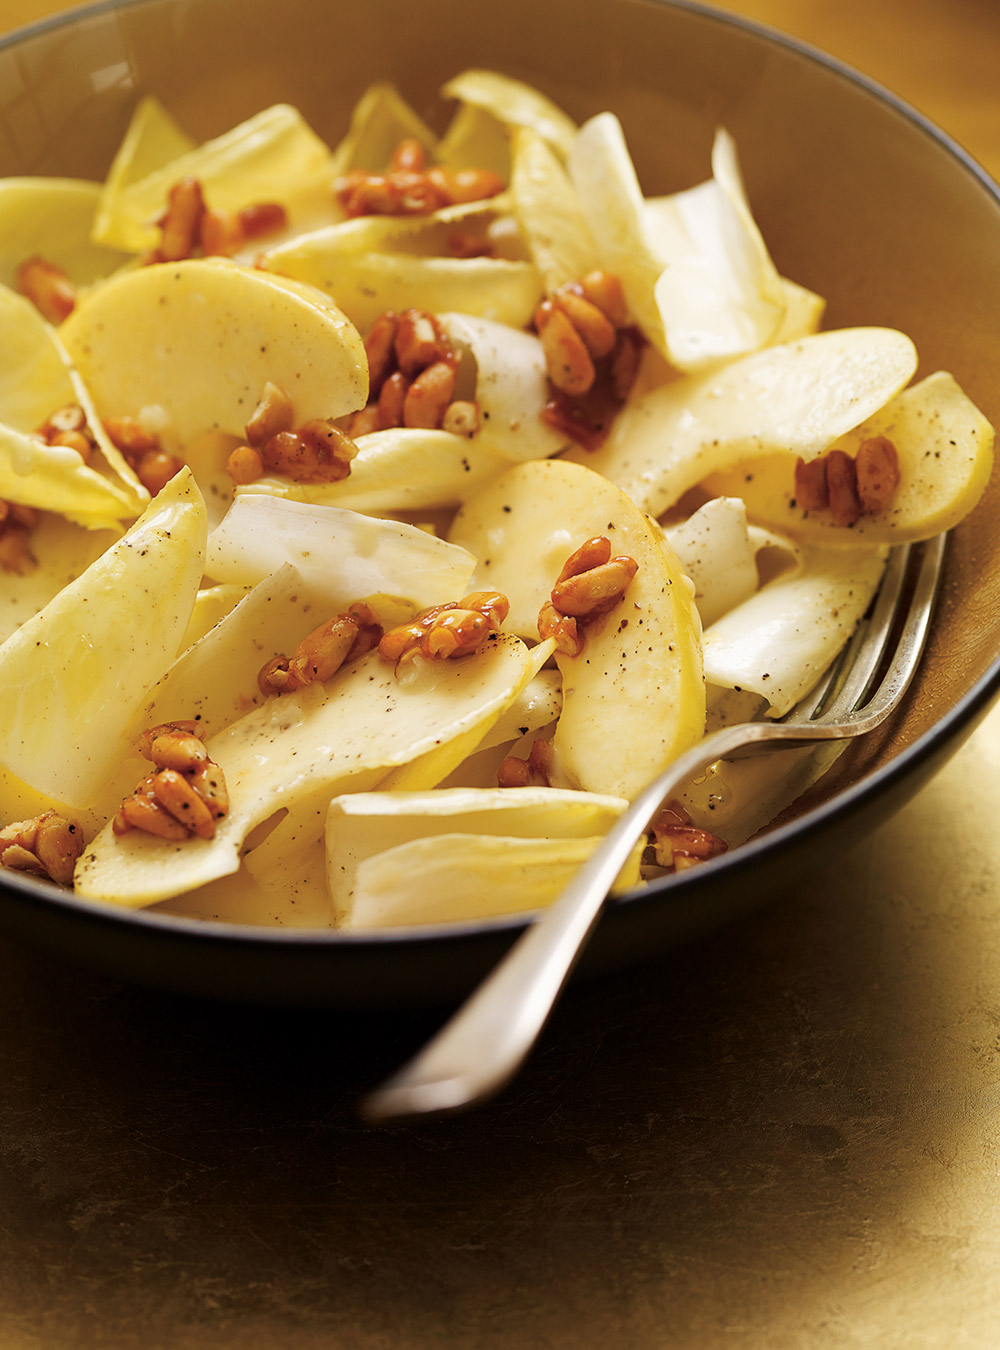 Endive and Apple Salad with Honey Caramelized Pine Nuts